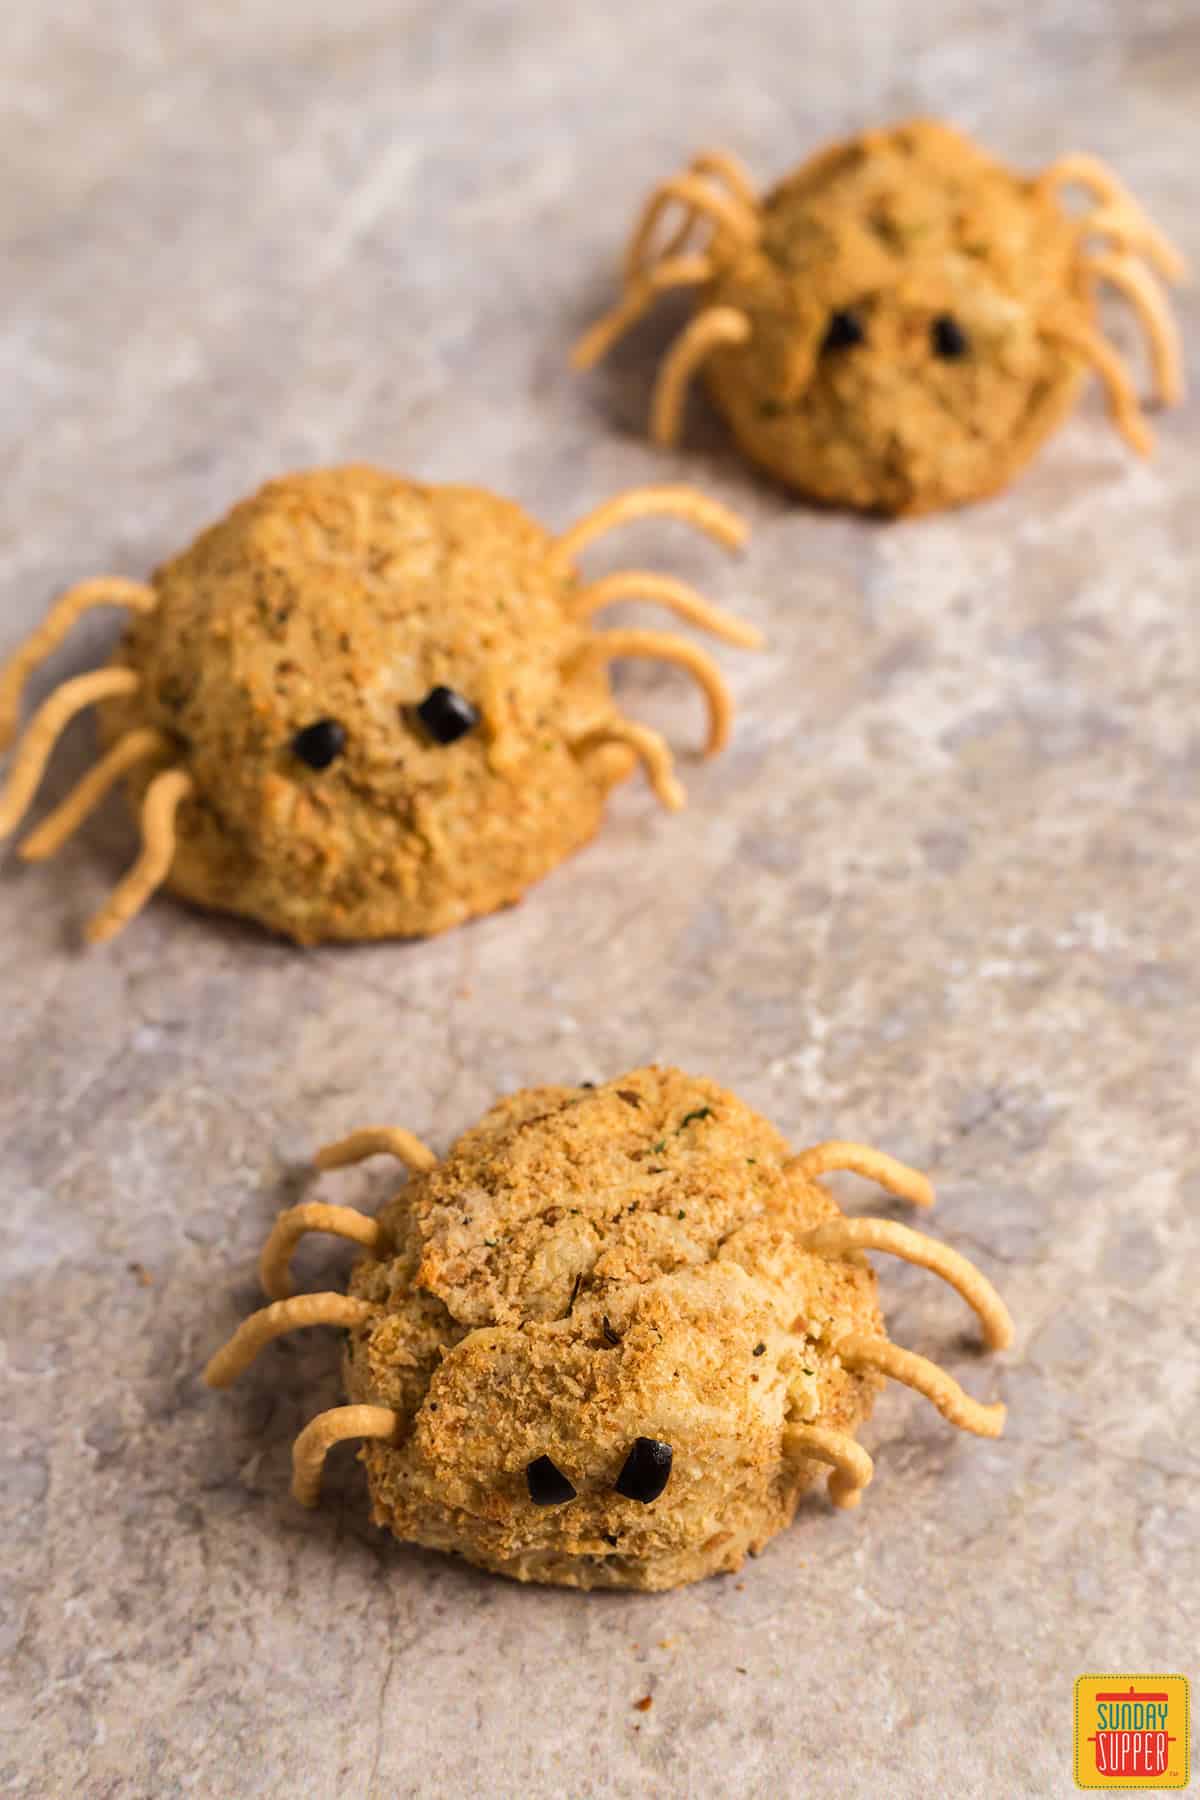 Three papas rellenas formed to look like cute spiders for Halloween